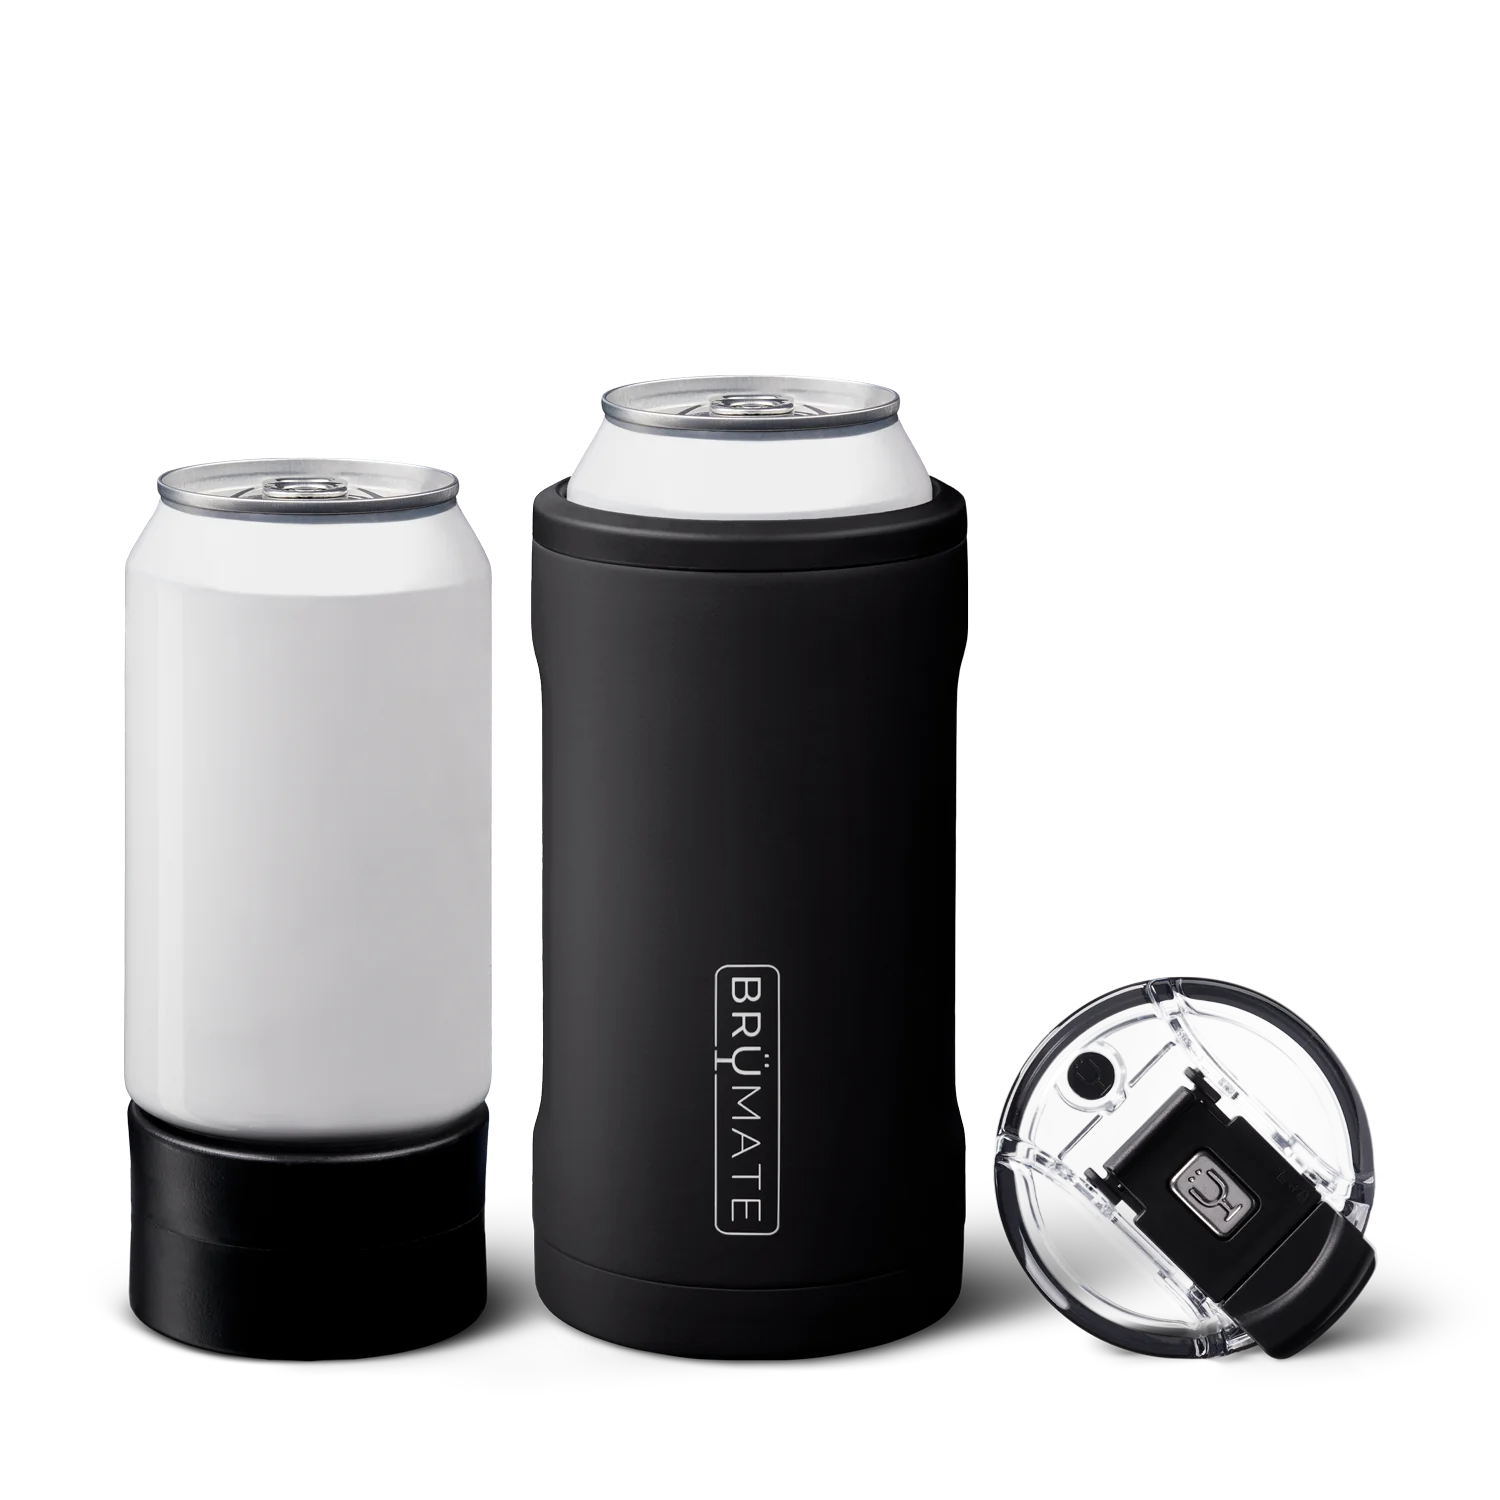 Black cylindrical can holder, alongside a black cylindrical can stand with a  colour matched lid next to it